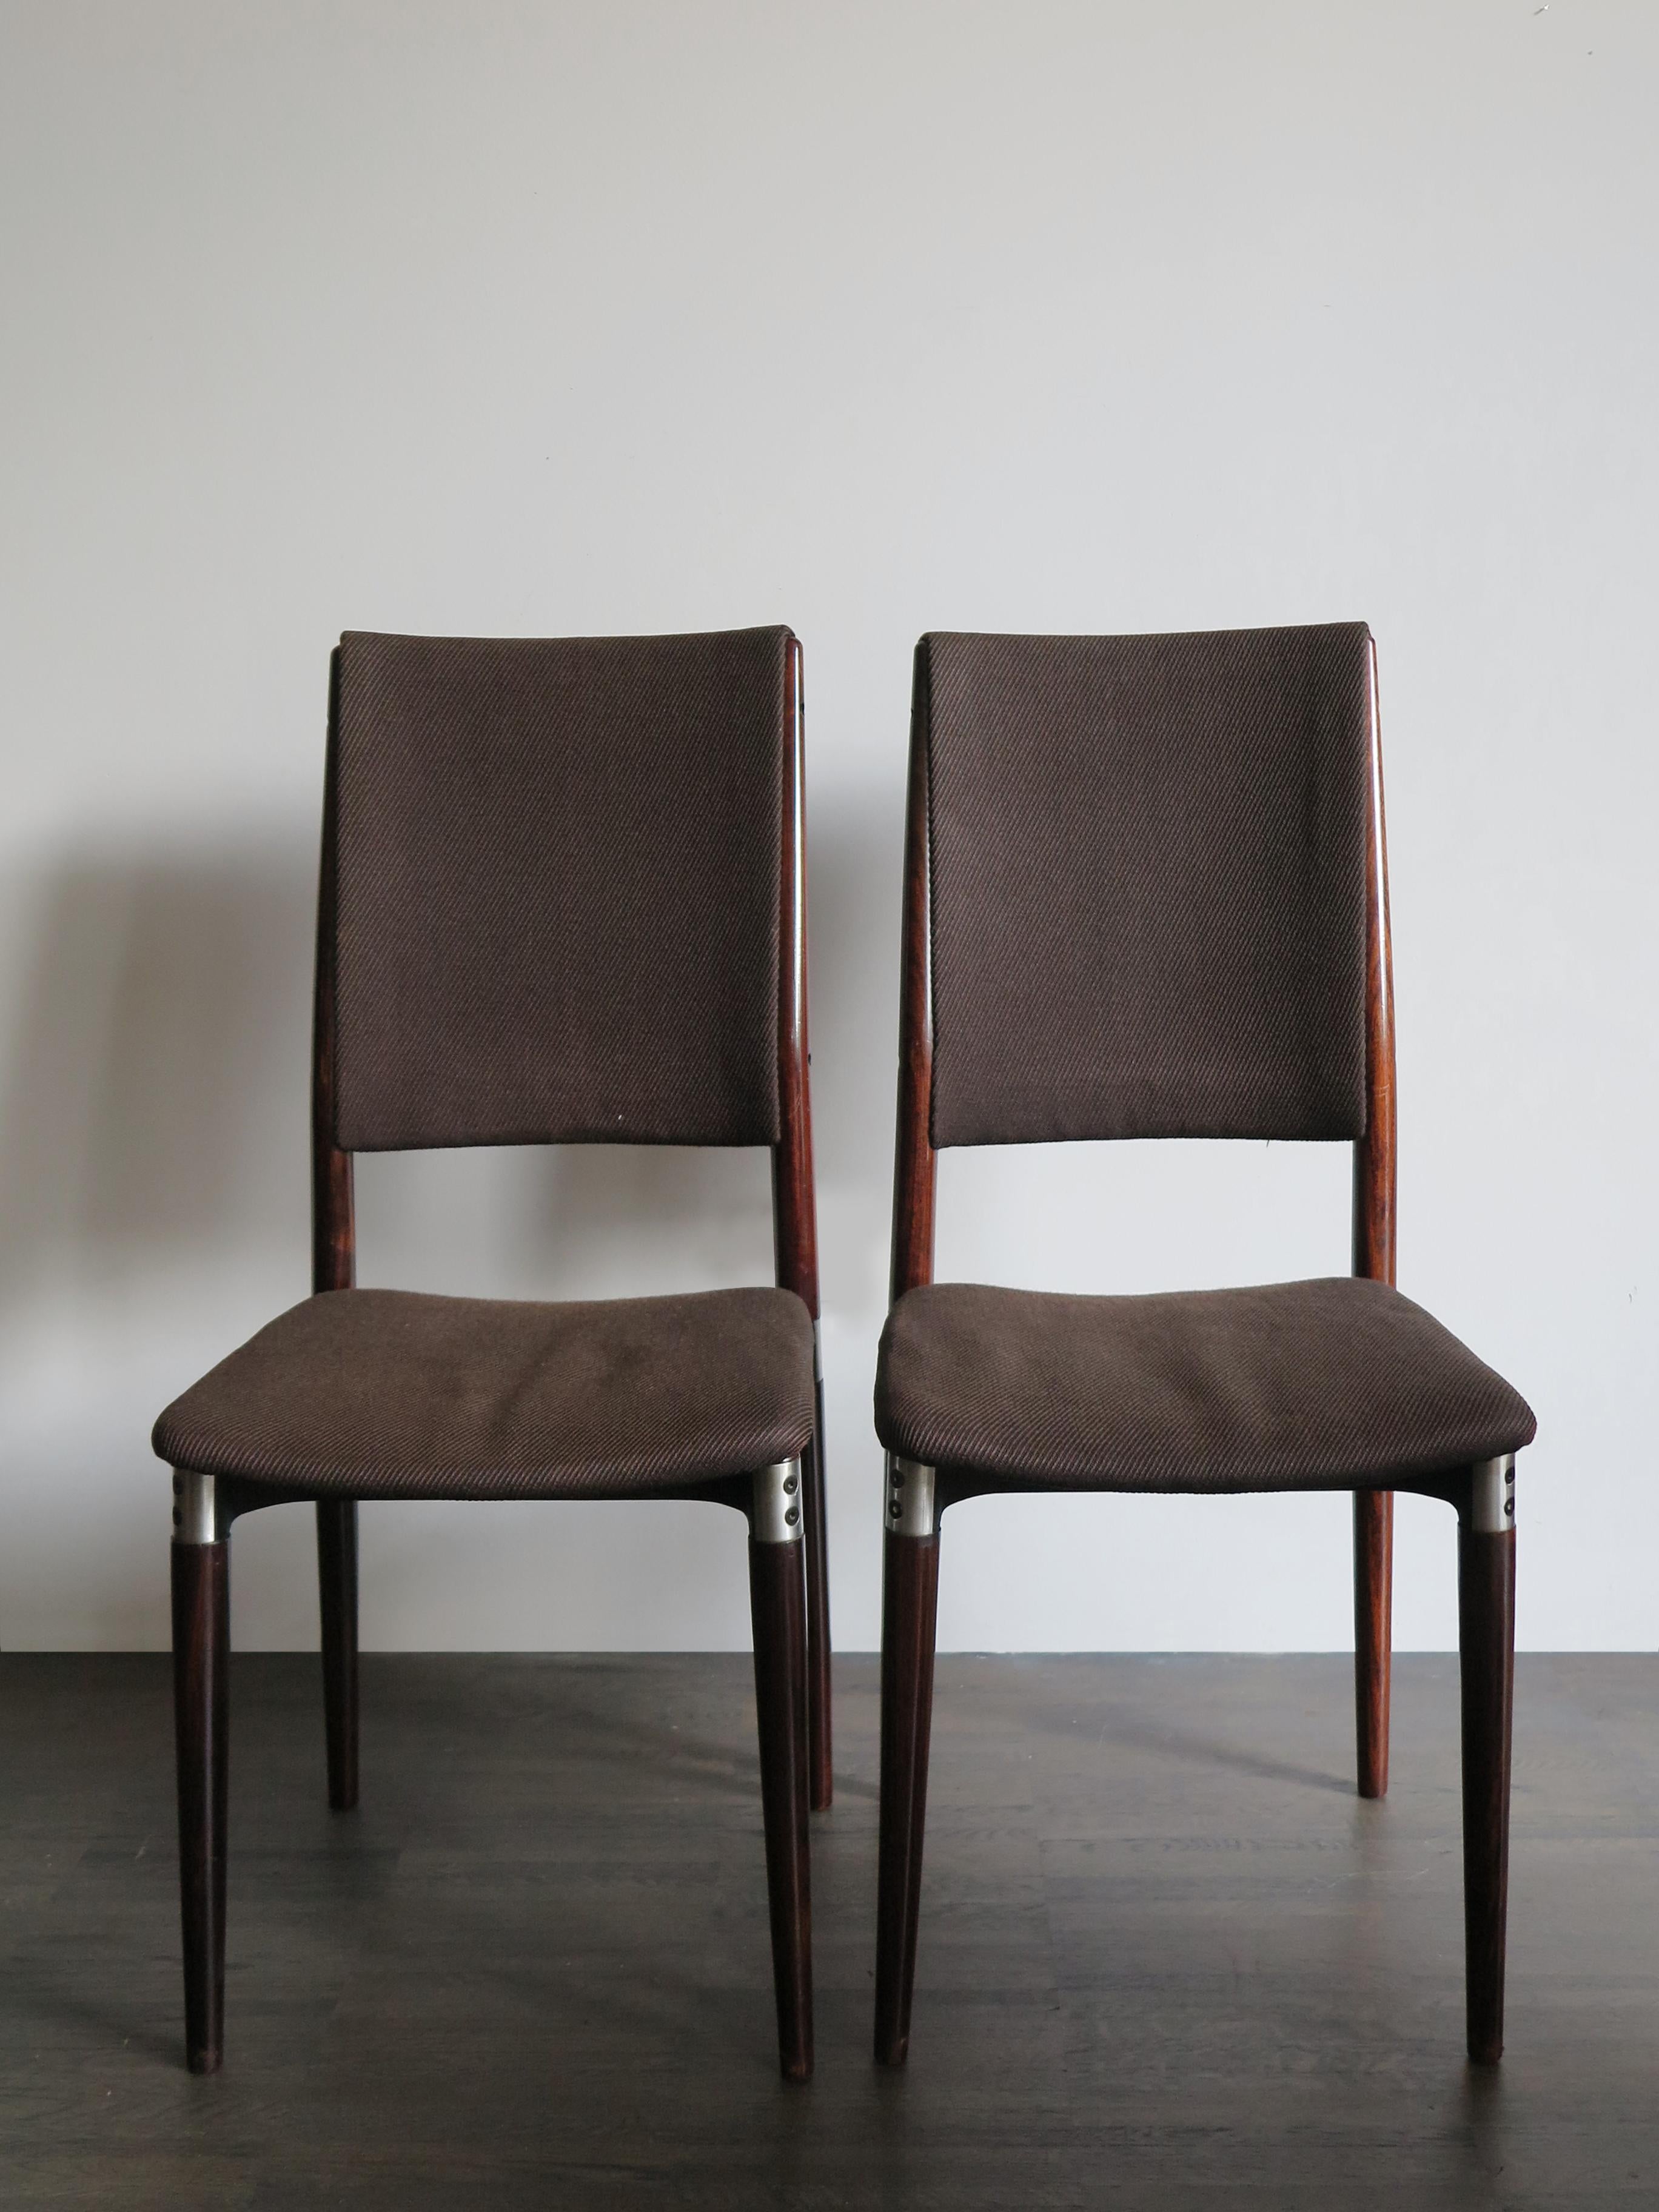 Mid-20th Century Italian Brown Dining Chairs by Eugenio Gerli for Tecno Model S81, 1950s